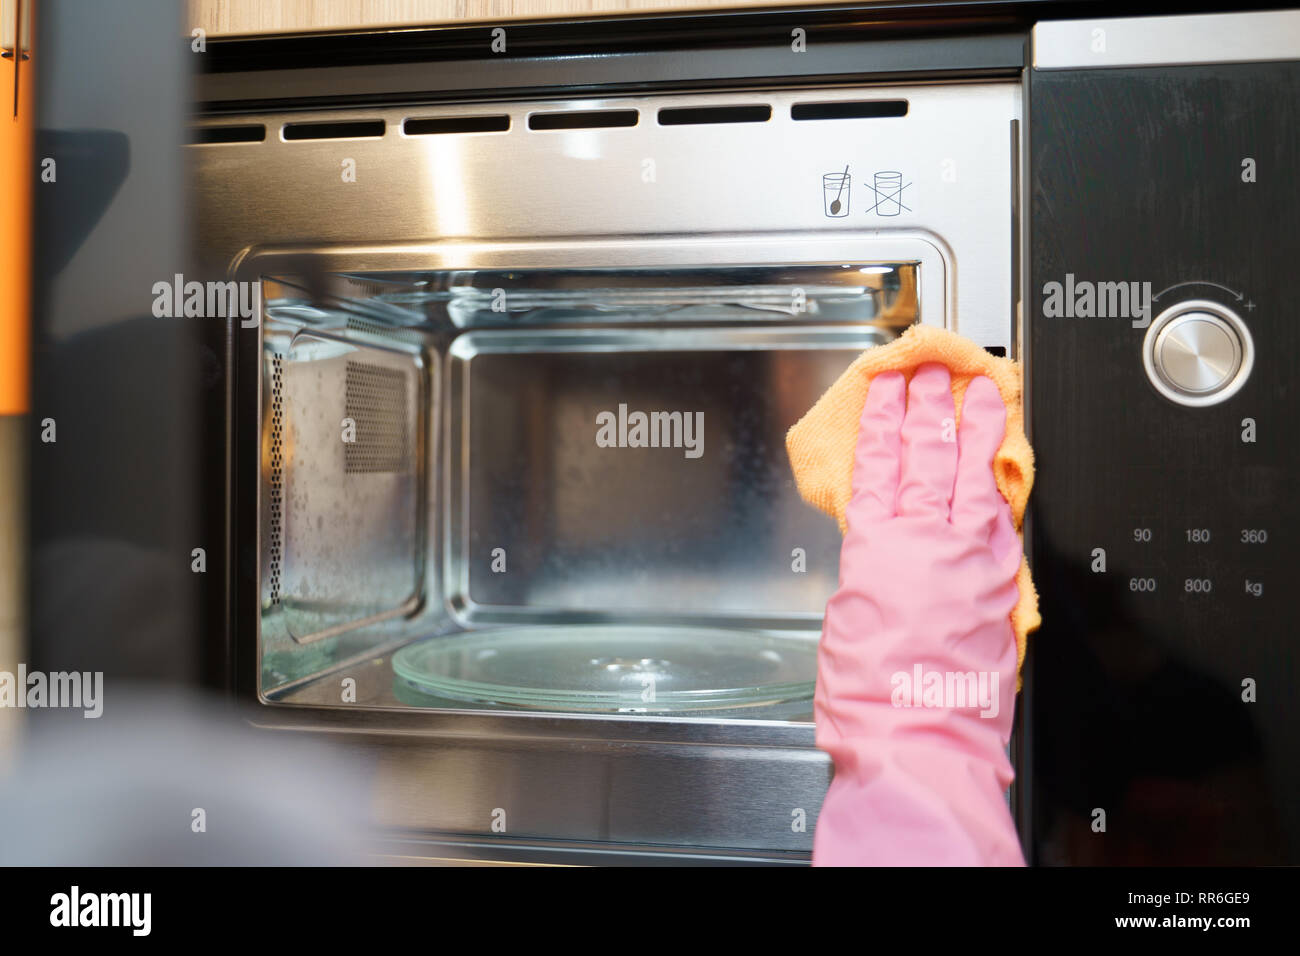 Picture of hands in rubber gloves washing microwave Stock Photo